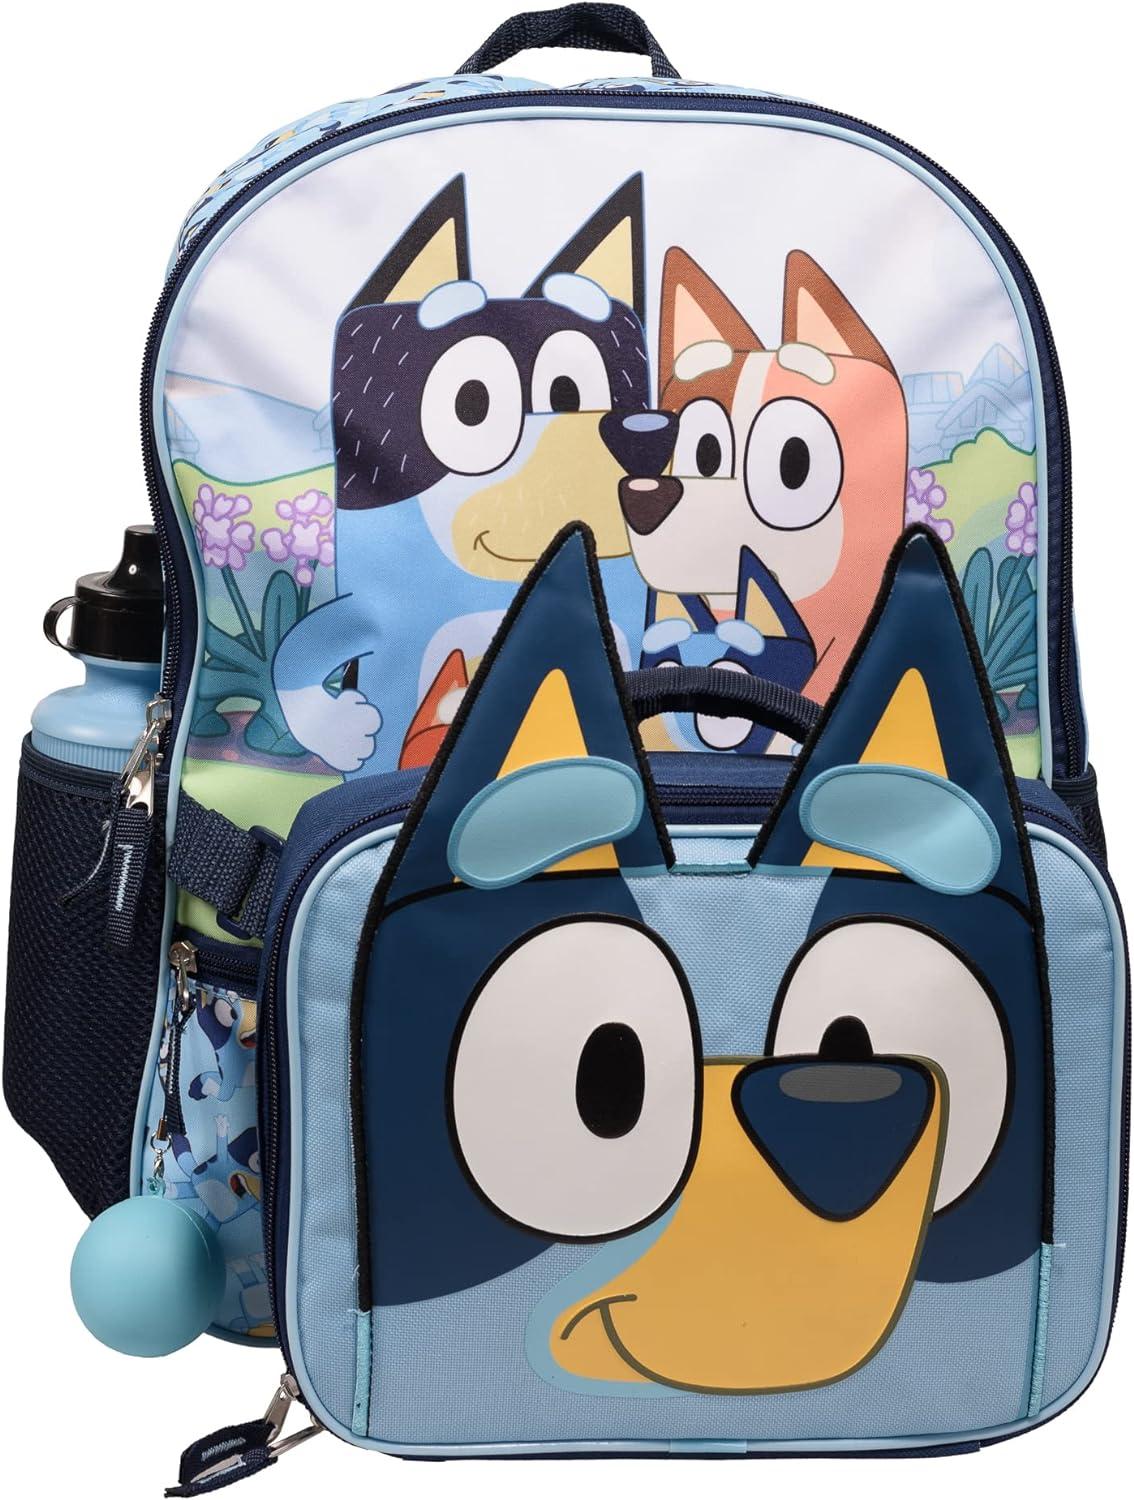 Bluey Lunch Bag for Kids 